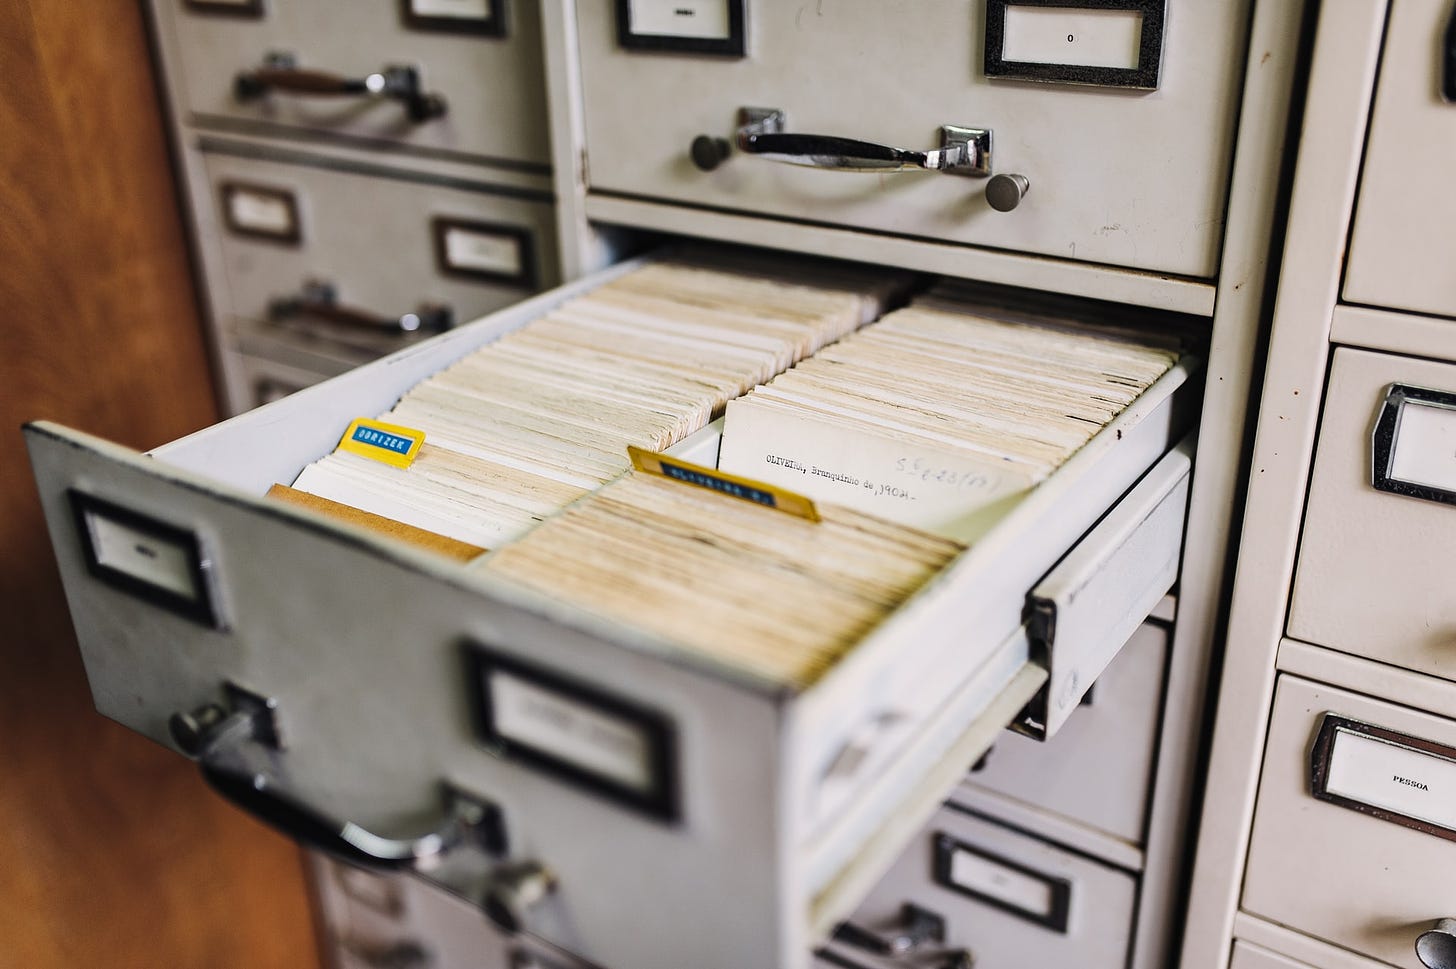 Old school library card catalogue with two side by side rows of index cards. Not actually a recipe box, but the best stock photo i could find. But could you imagine this many recipes? 